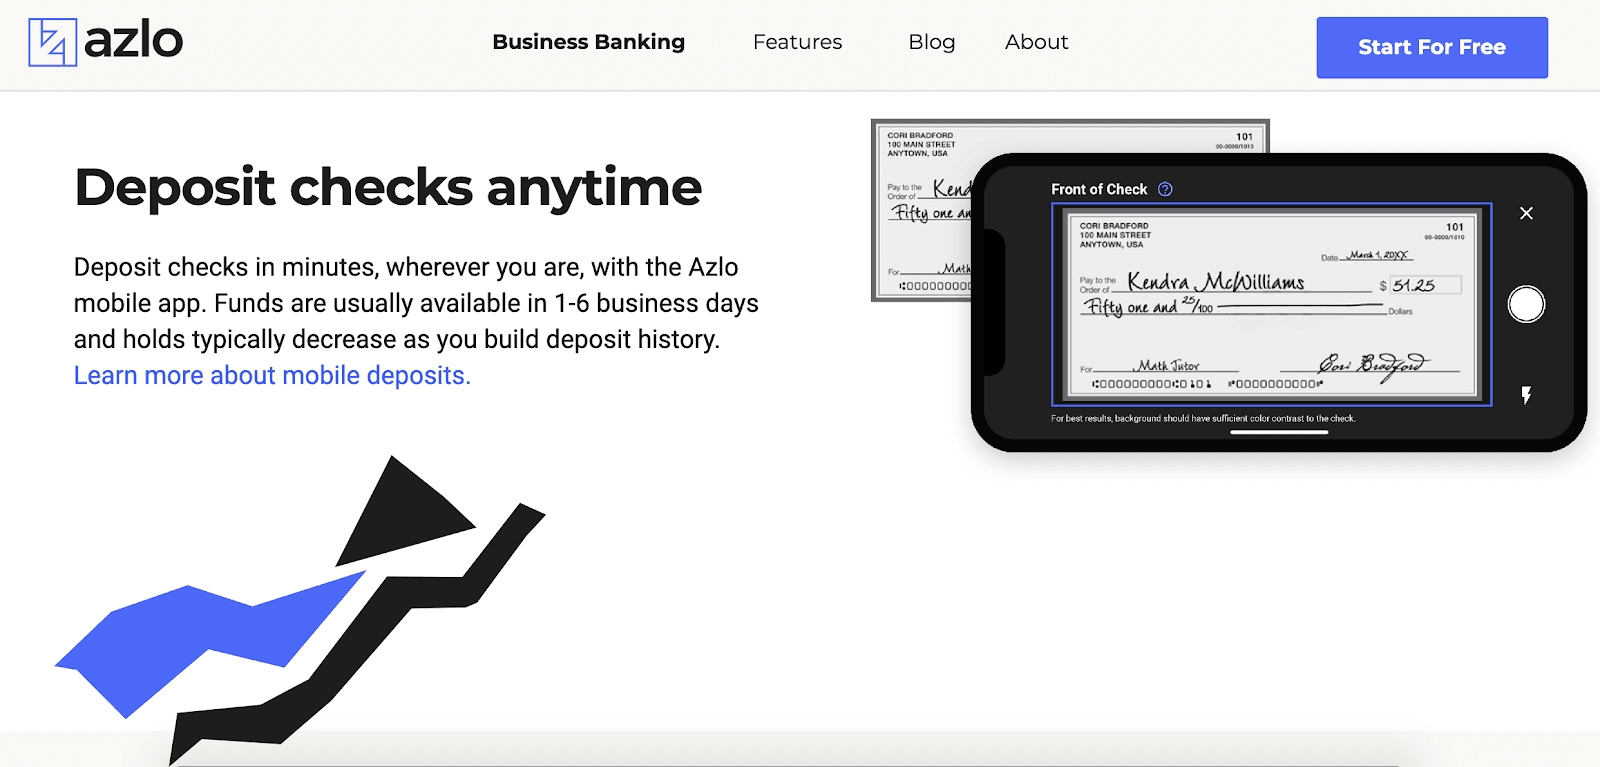 Azlo Review: My Experience Researching Azlo’s Banking Features - deposit checks anytime